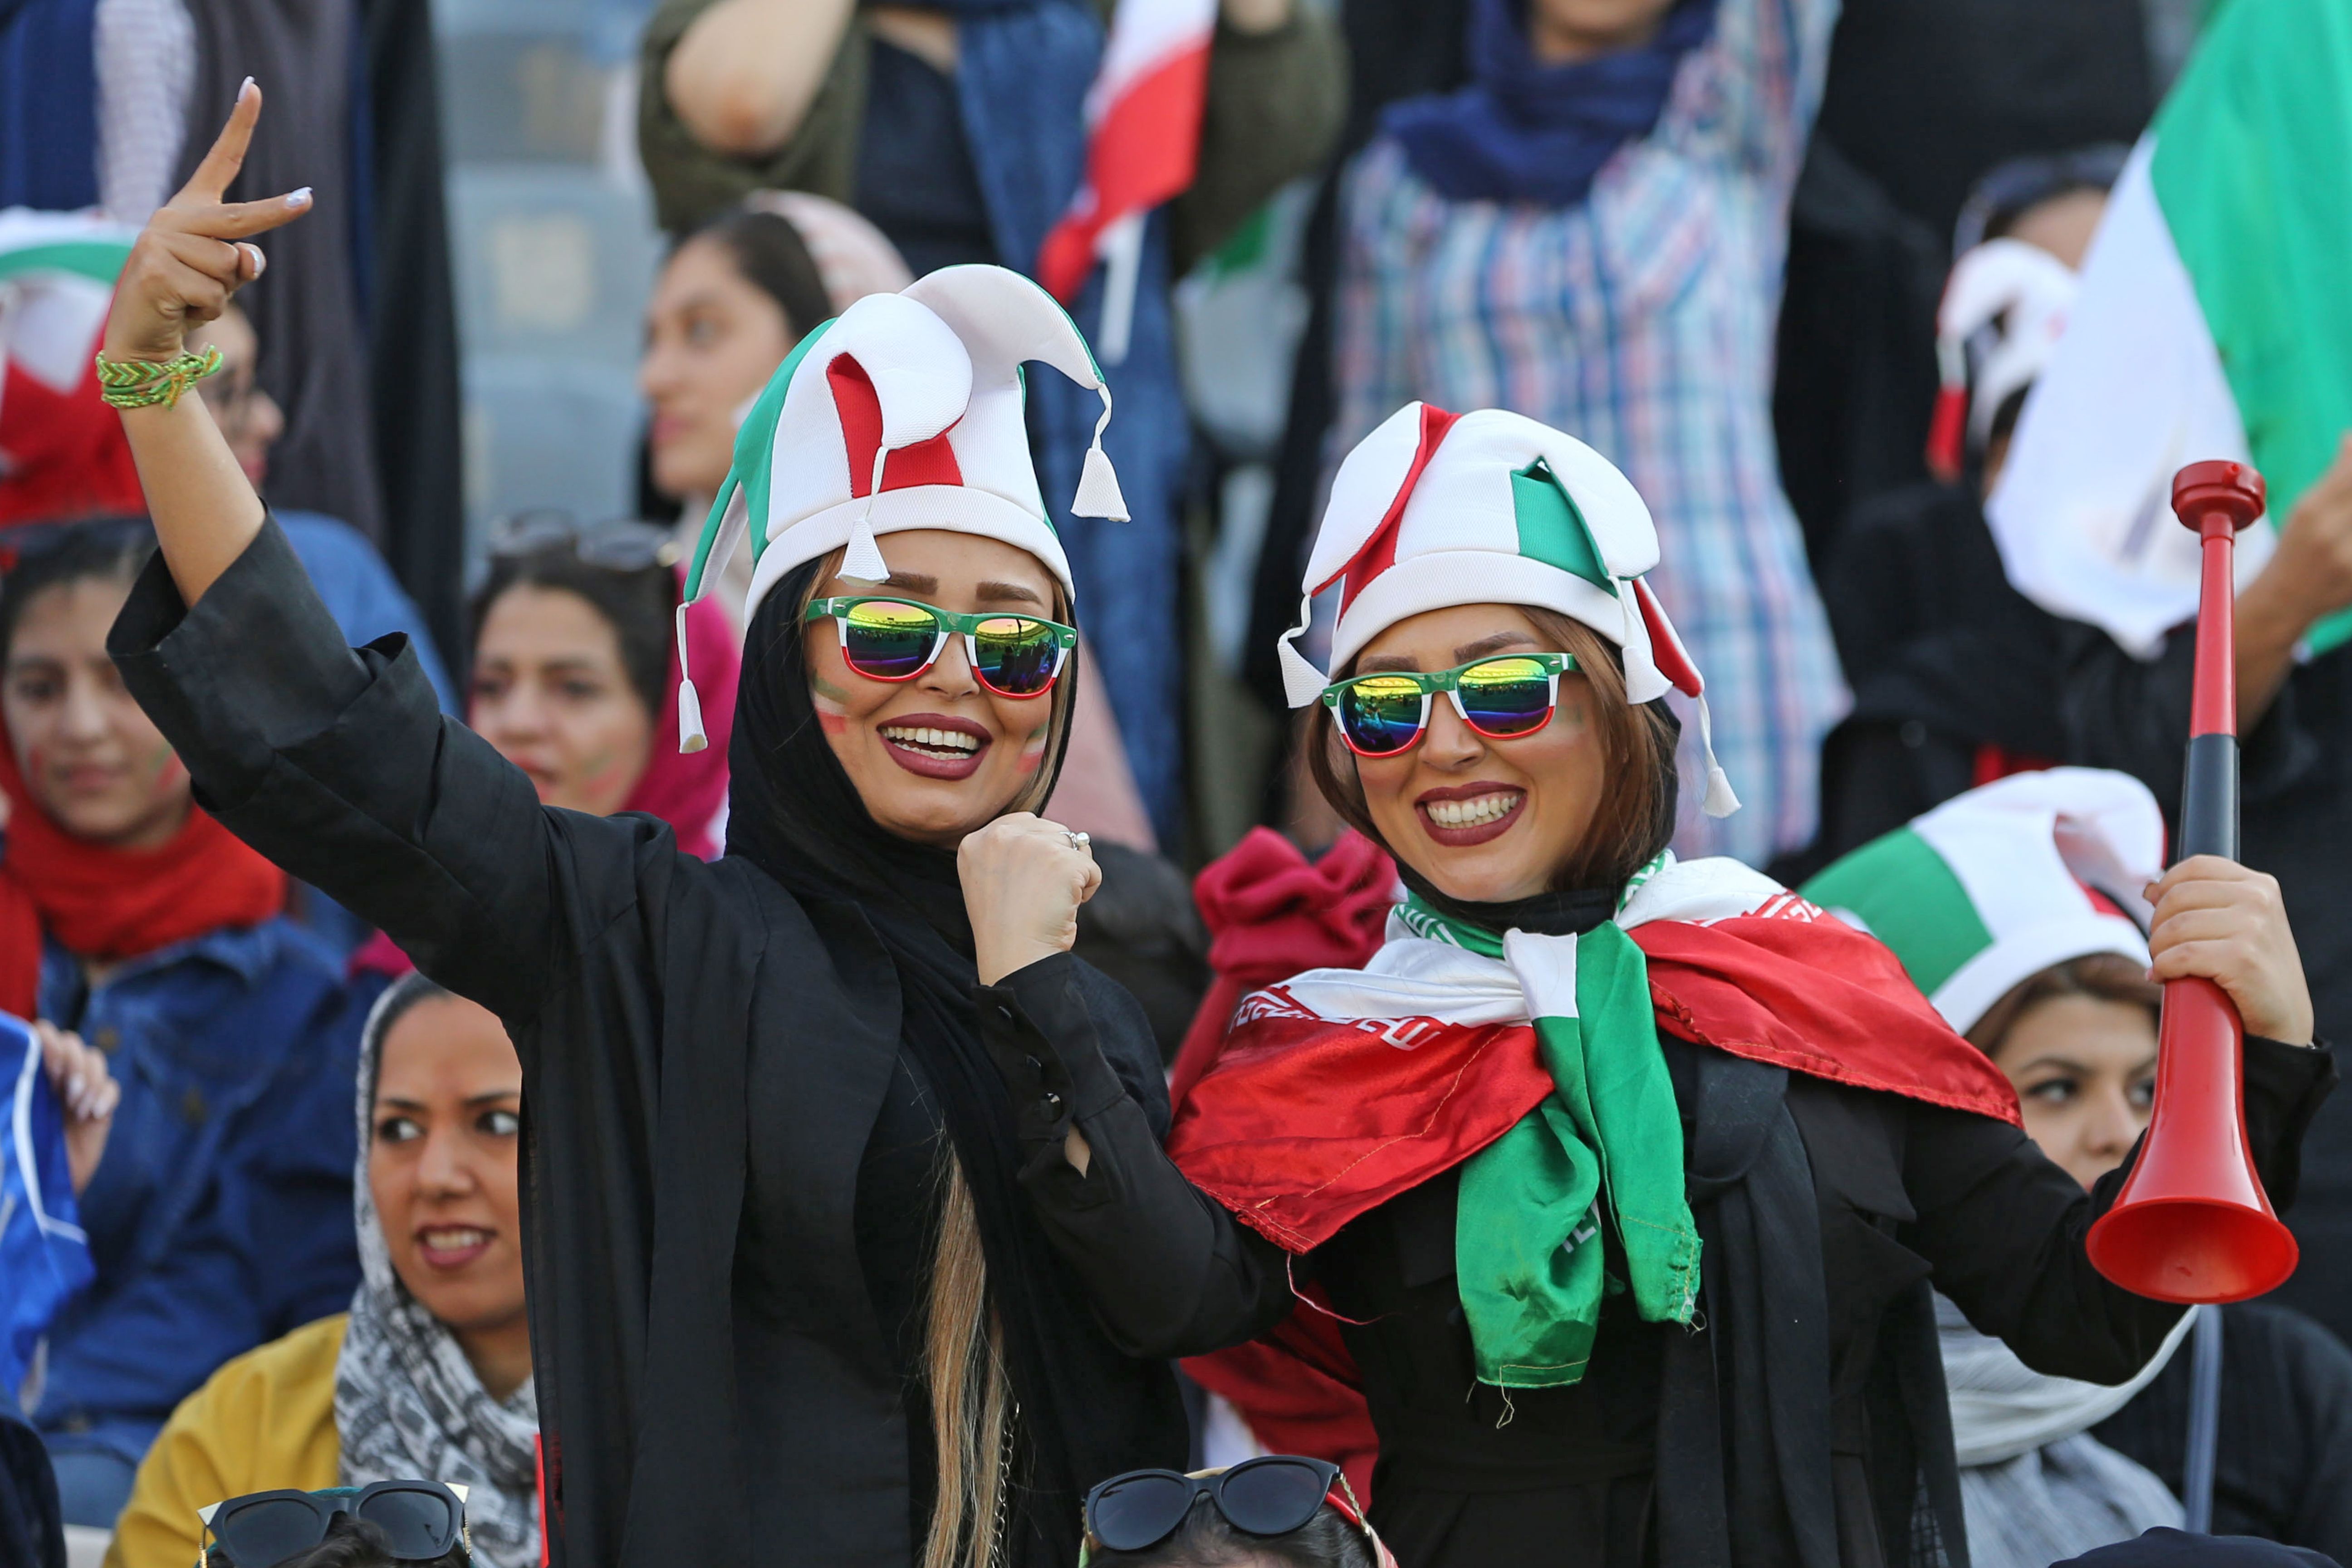 Iranian women cheering at a soccer game